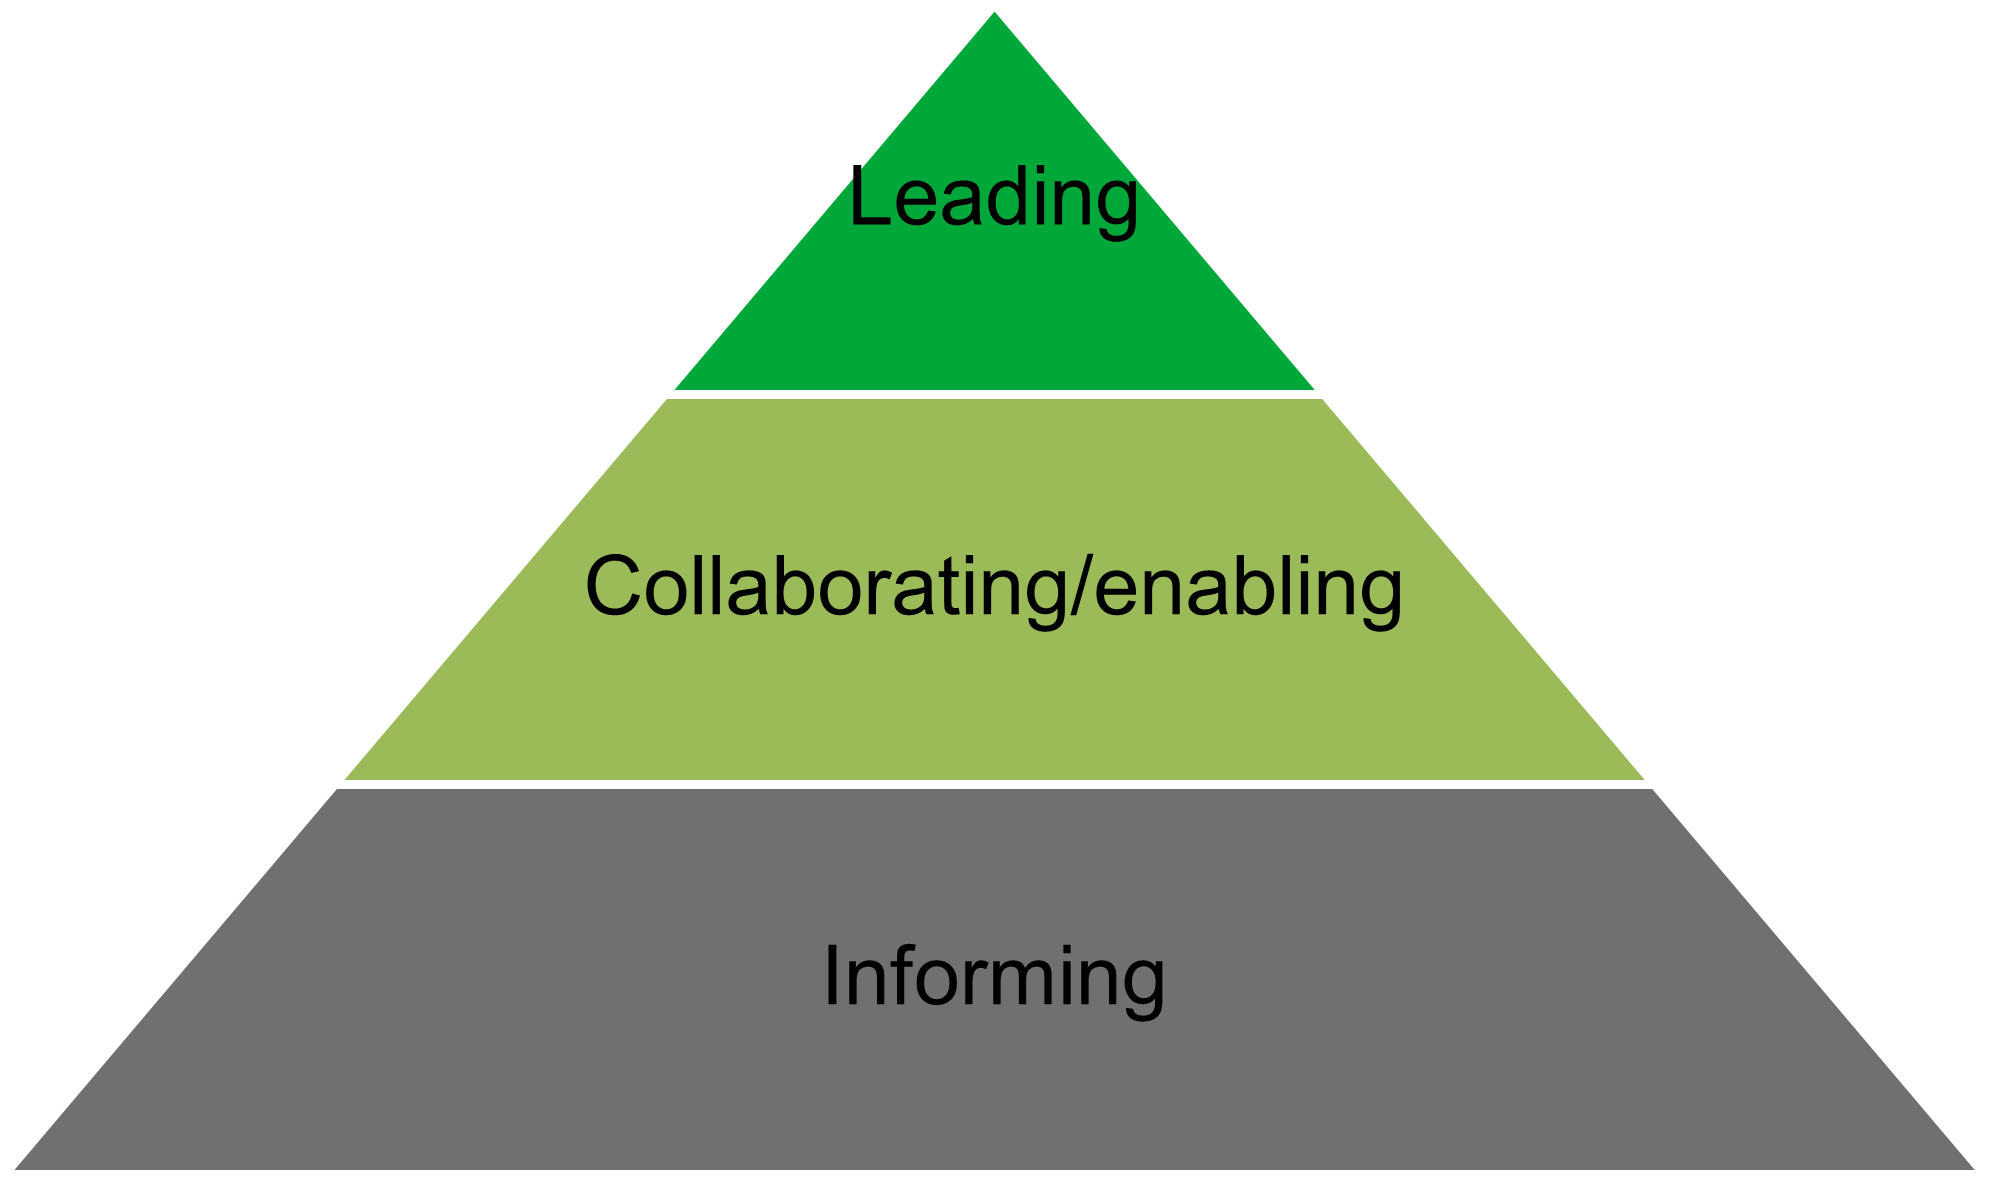 This image shows a pyramid structure of the typology of Community Engagement.